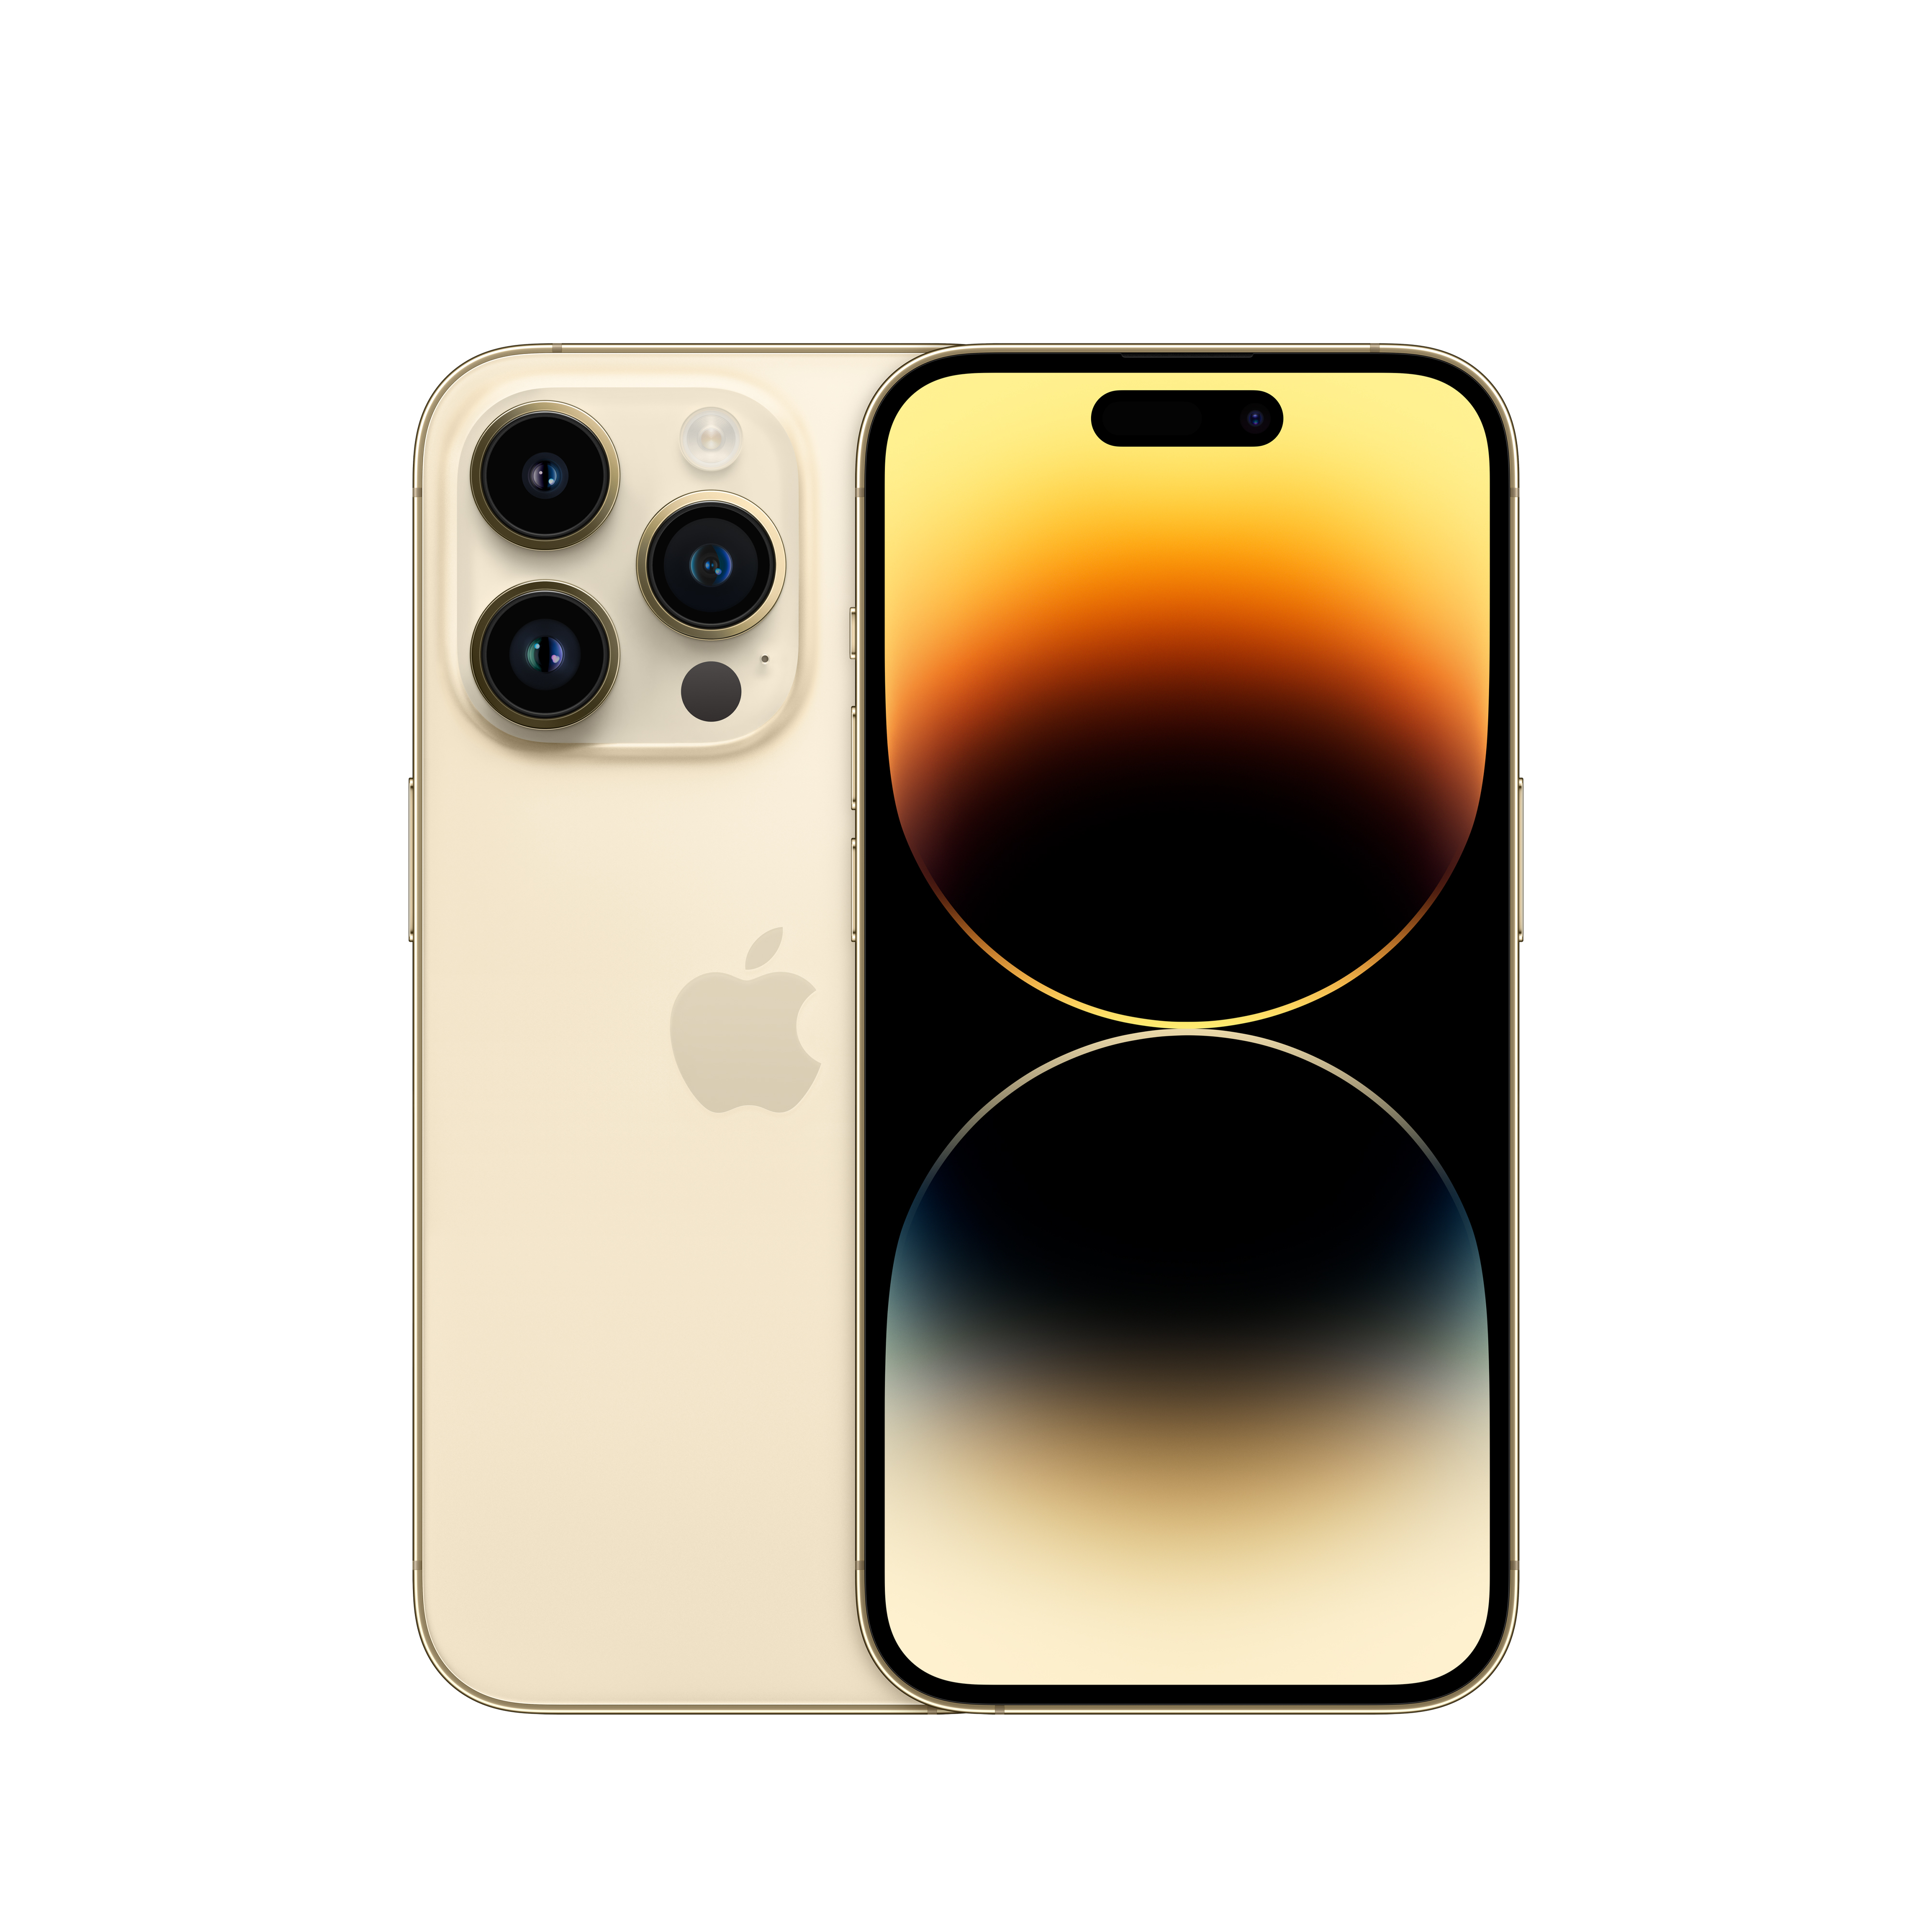 Apple MQ083HN/A iPhone 14 Pro Gold with 128 GB, iOS 16, A15 Bionic chip, 6core CPU with 2 performance, 6.1 inch OLED display